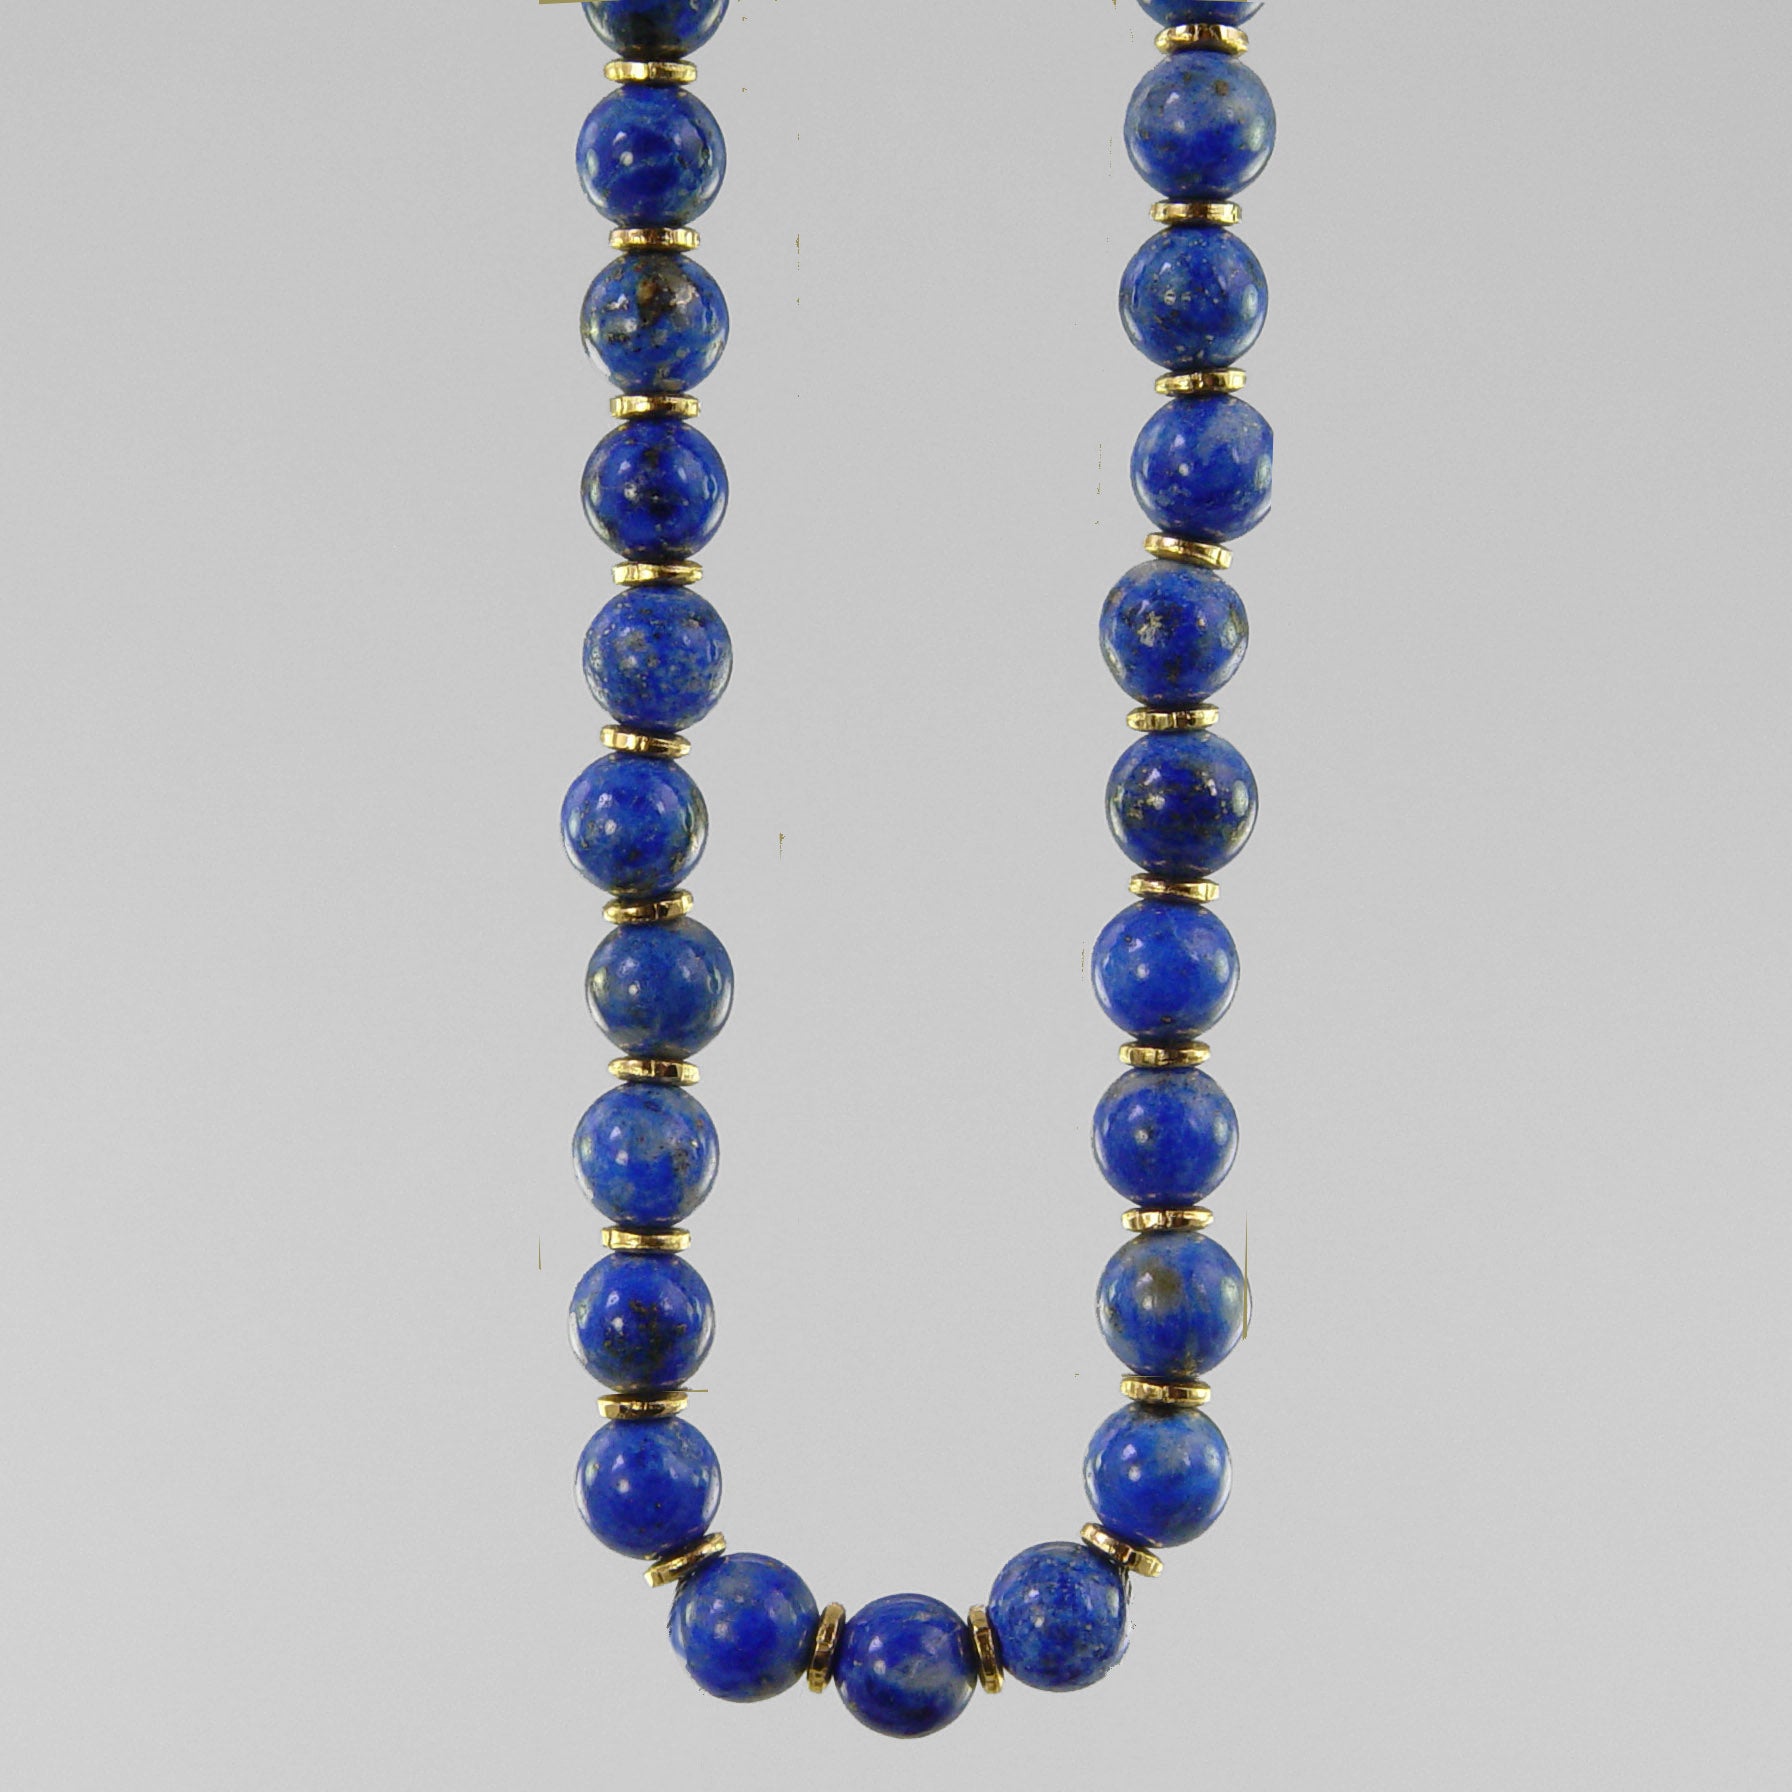 Lapis Lazuli Round Bead with Accents 16", 18", 20" or 24" Necklace